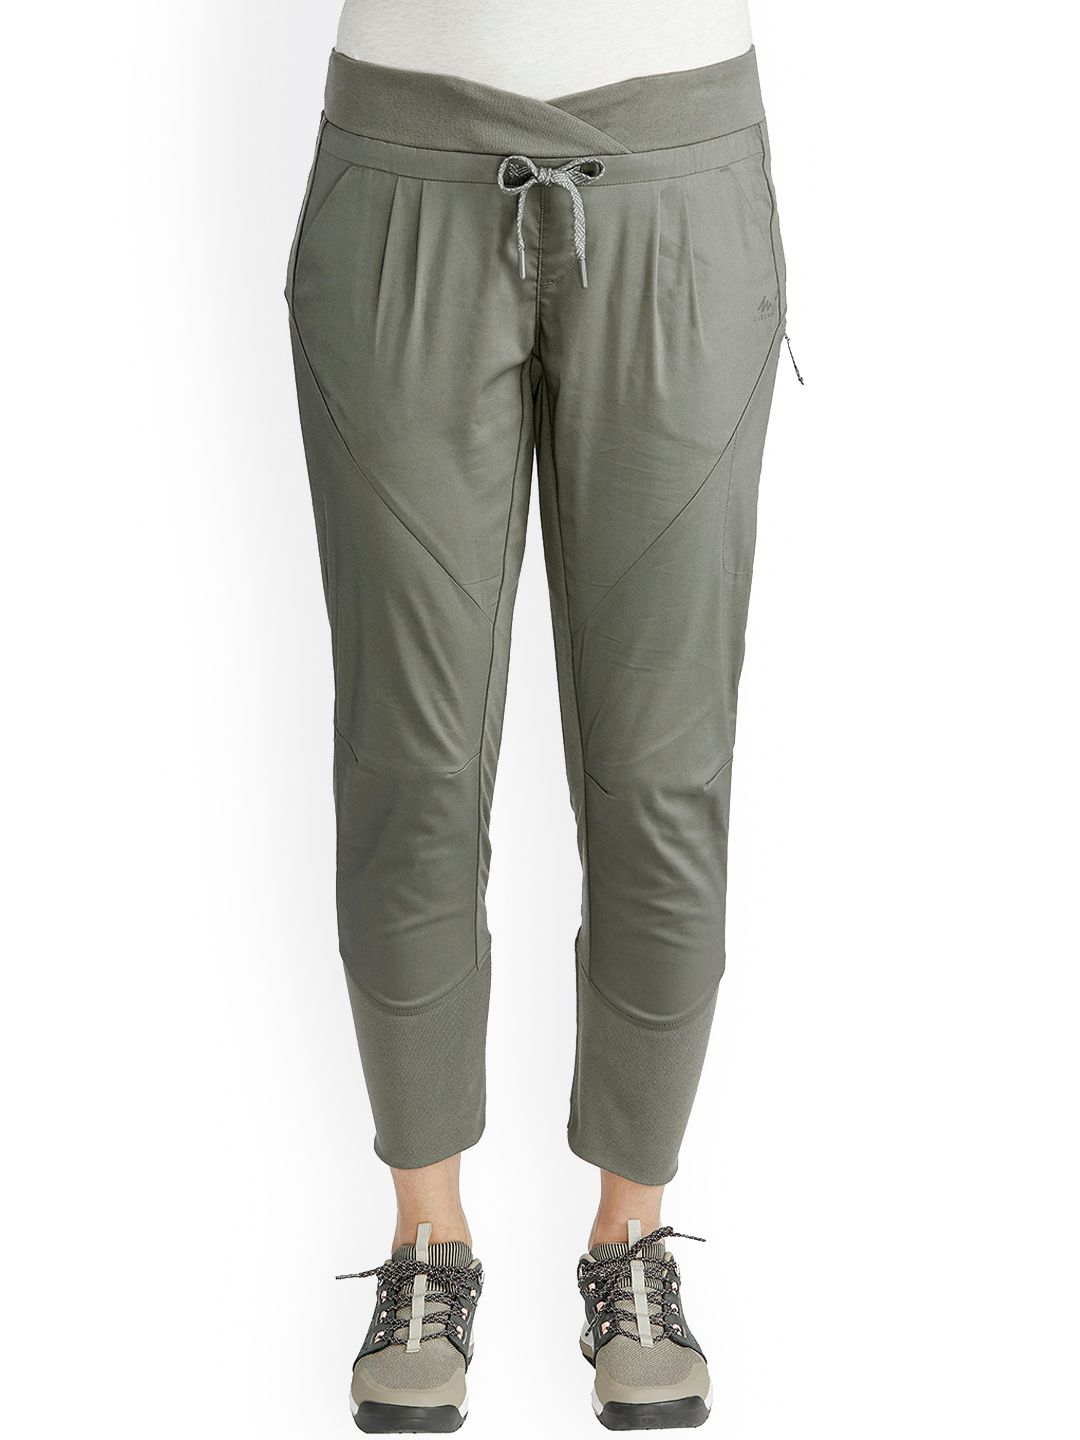 Quechua By Decathlon Women Olive Green Slim Fit Solid Hiking Trousers Price in India